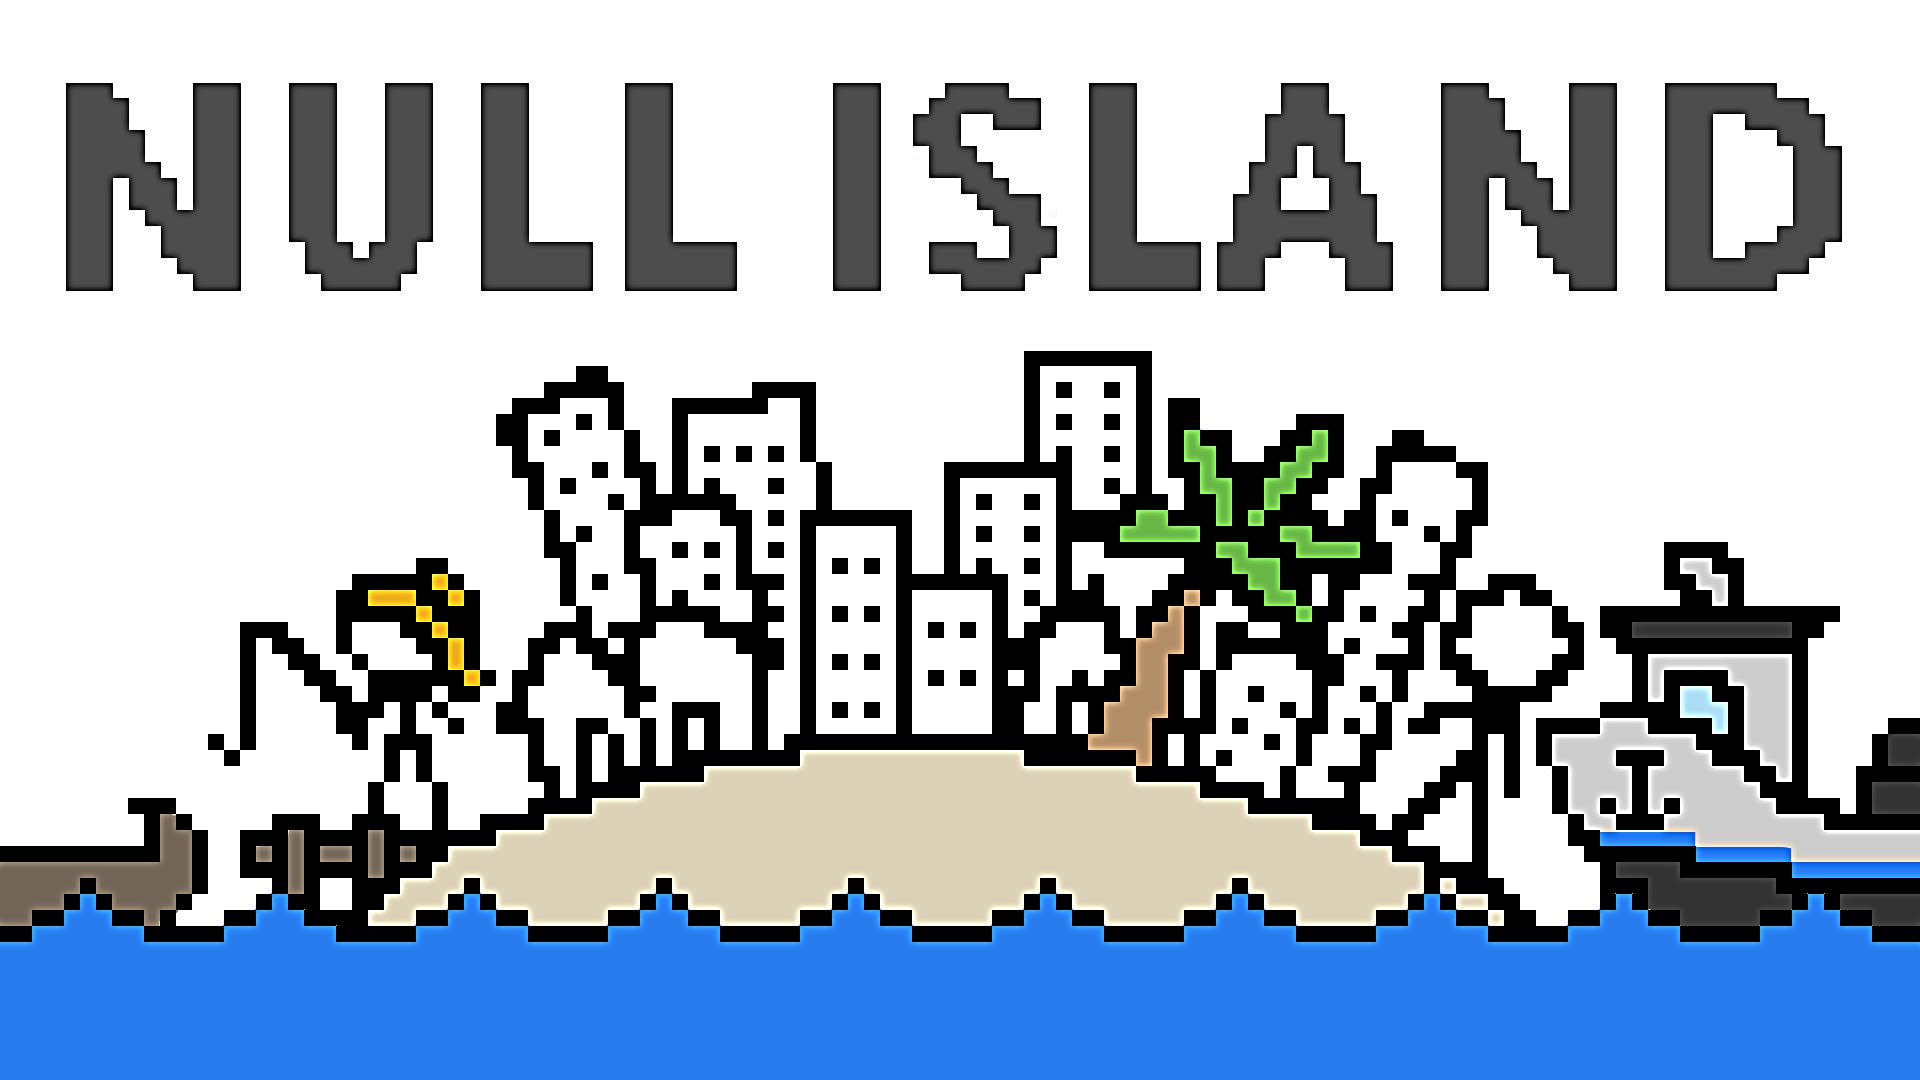 Null Island: The Busiest Place That Doesn't Exist - YouTube